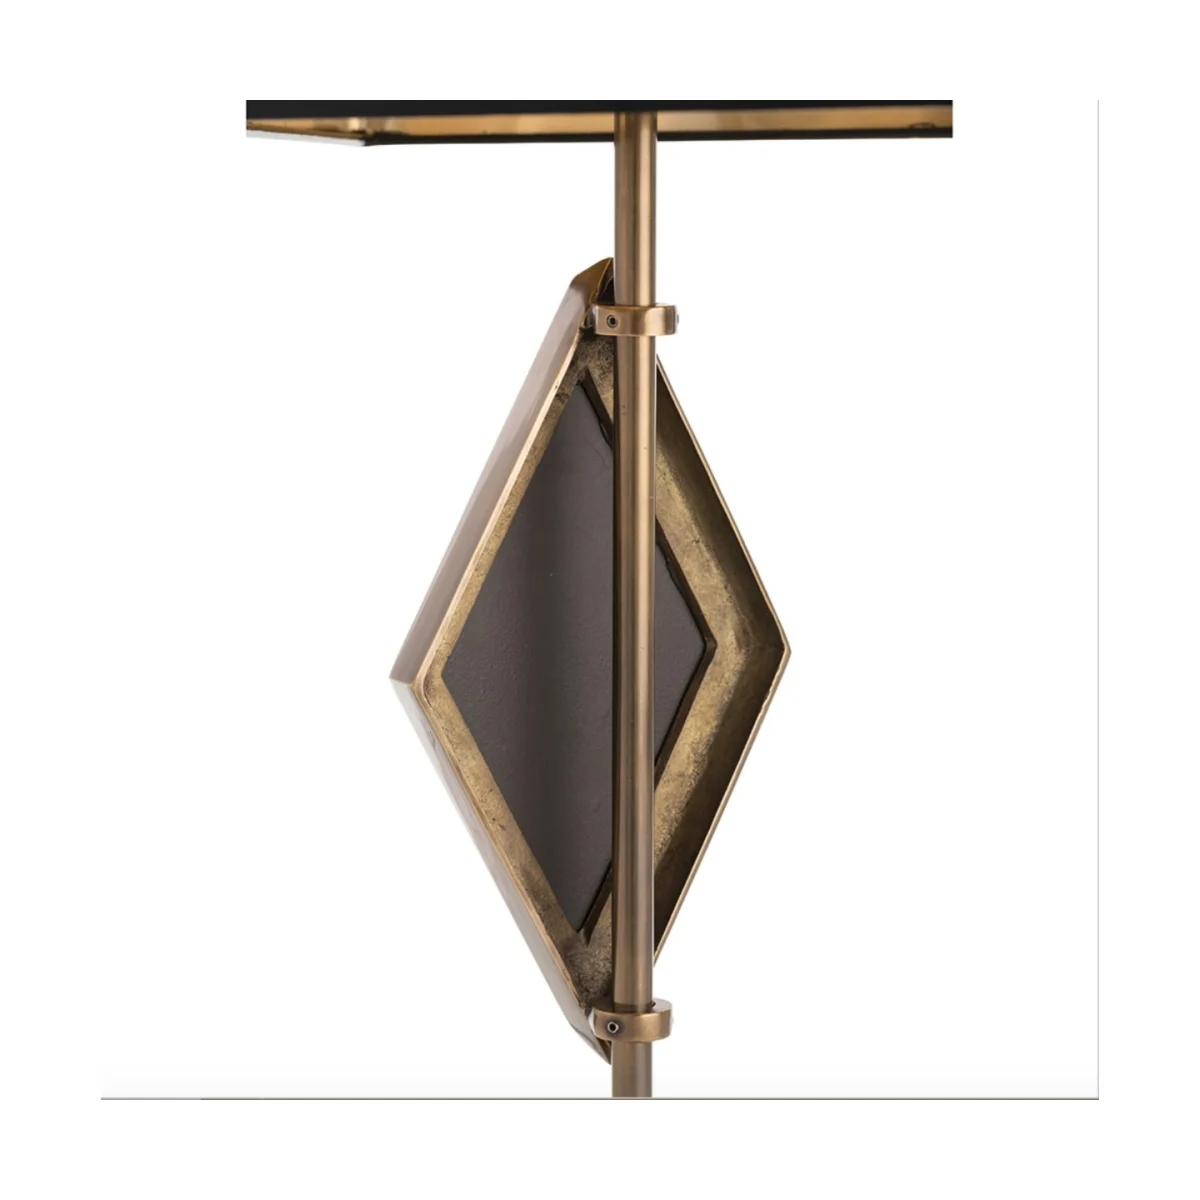 Luxury brass metal stand with diamond glass detail desk lamp from Luxuria London